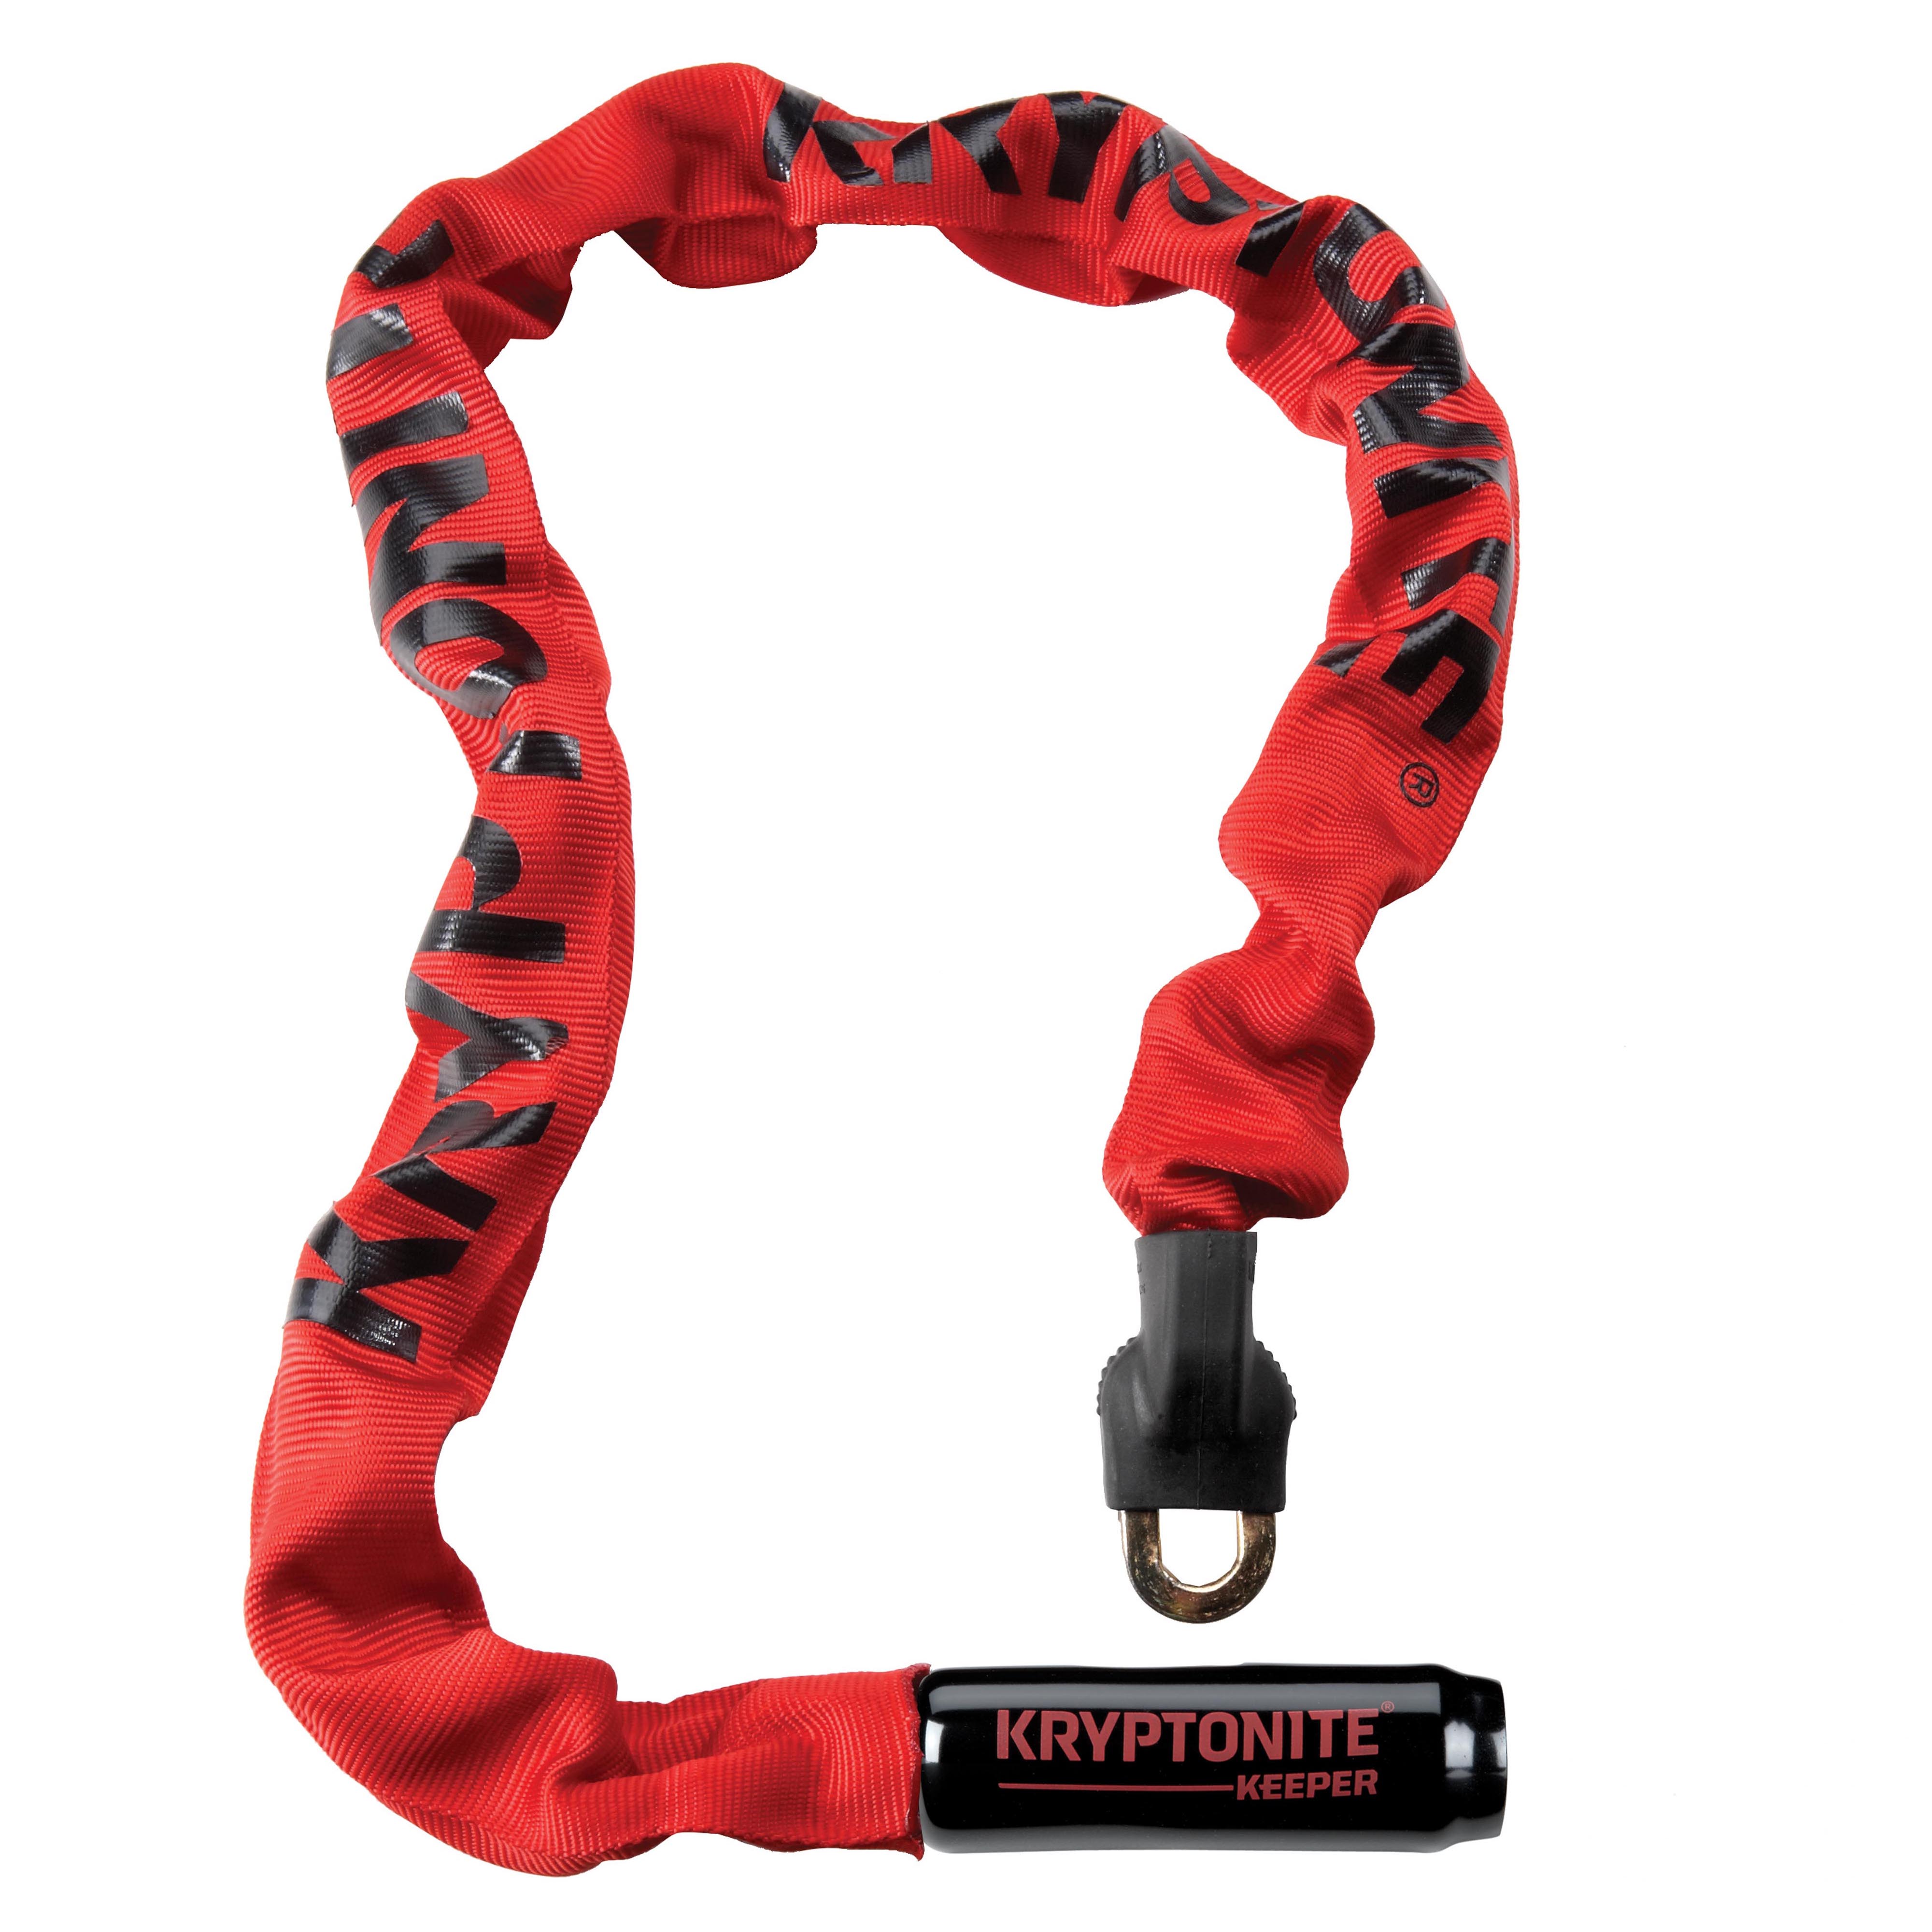 Kryptonite Keeper 465 Key Chains - Sunset Cyclery - St. Louis